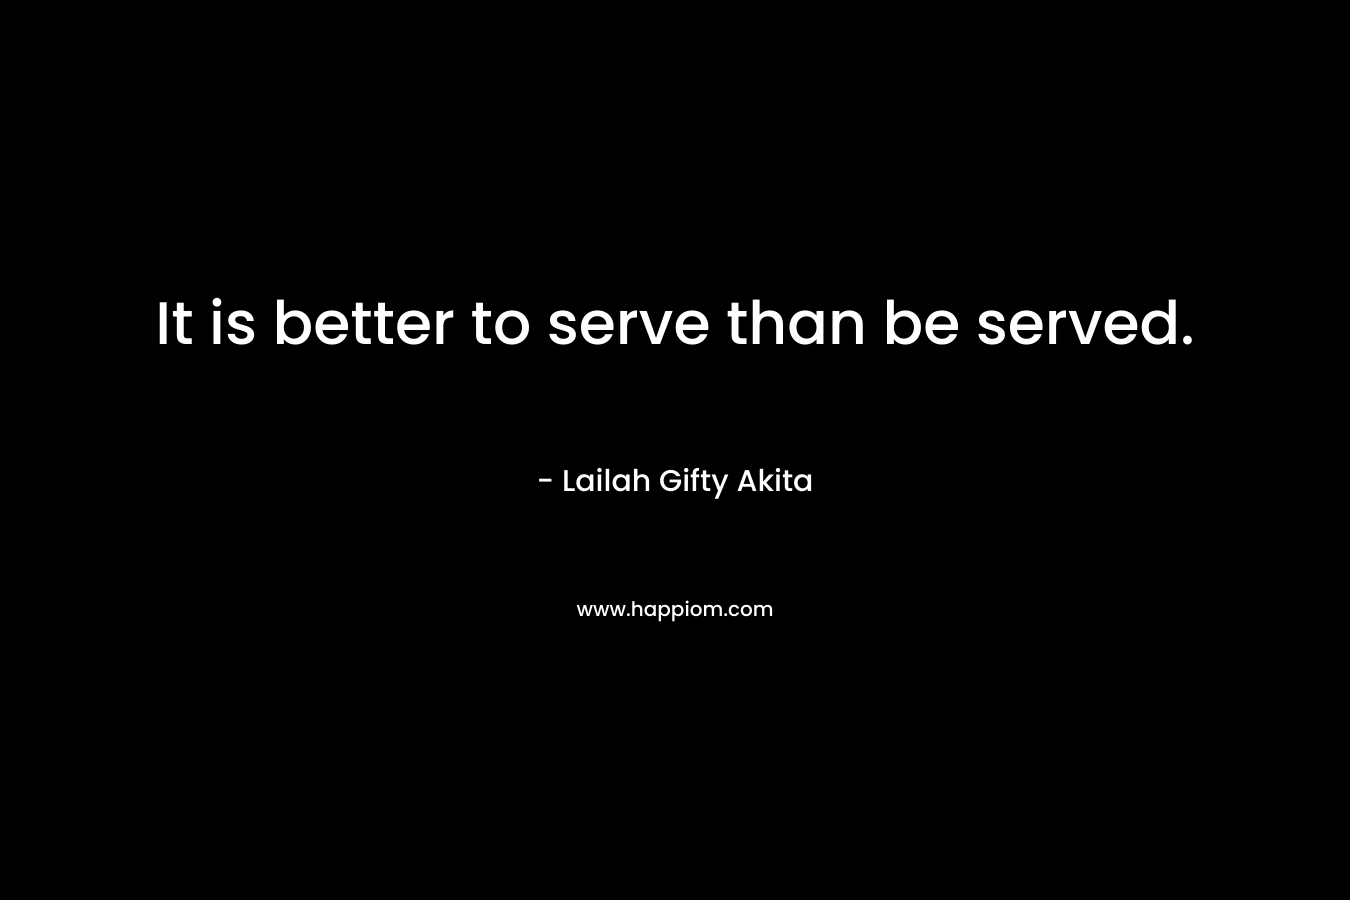 It is better to serve than be served.